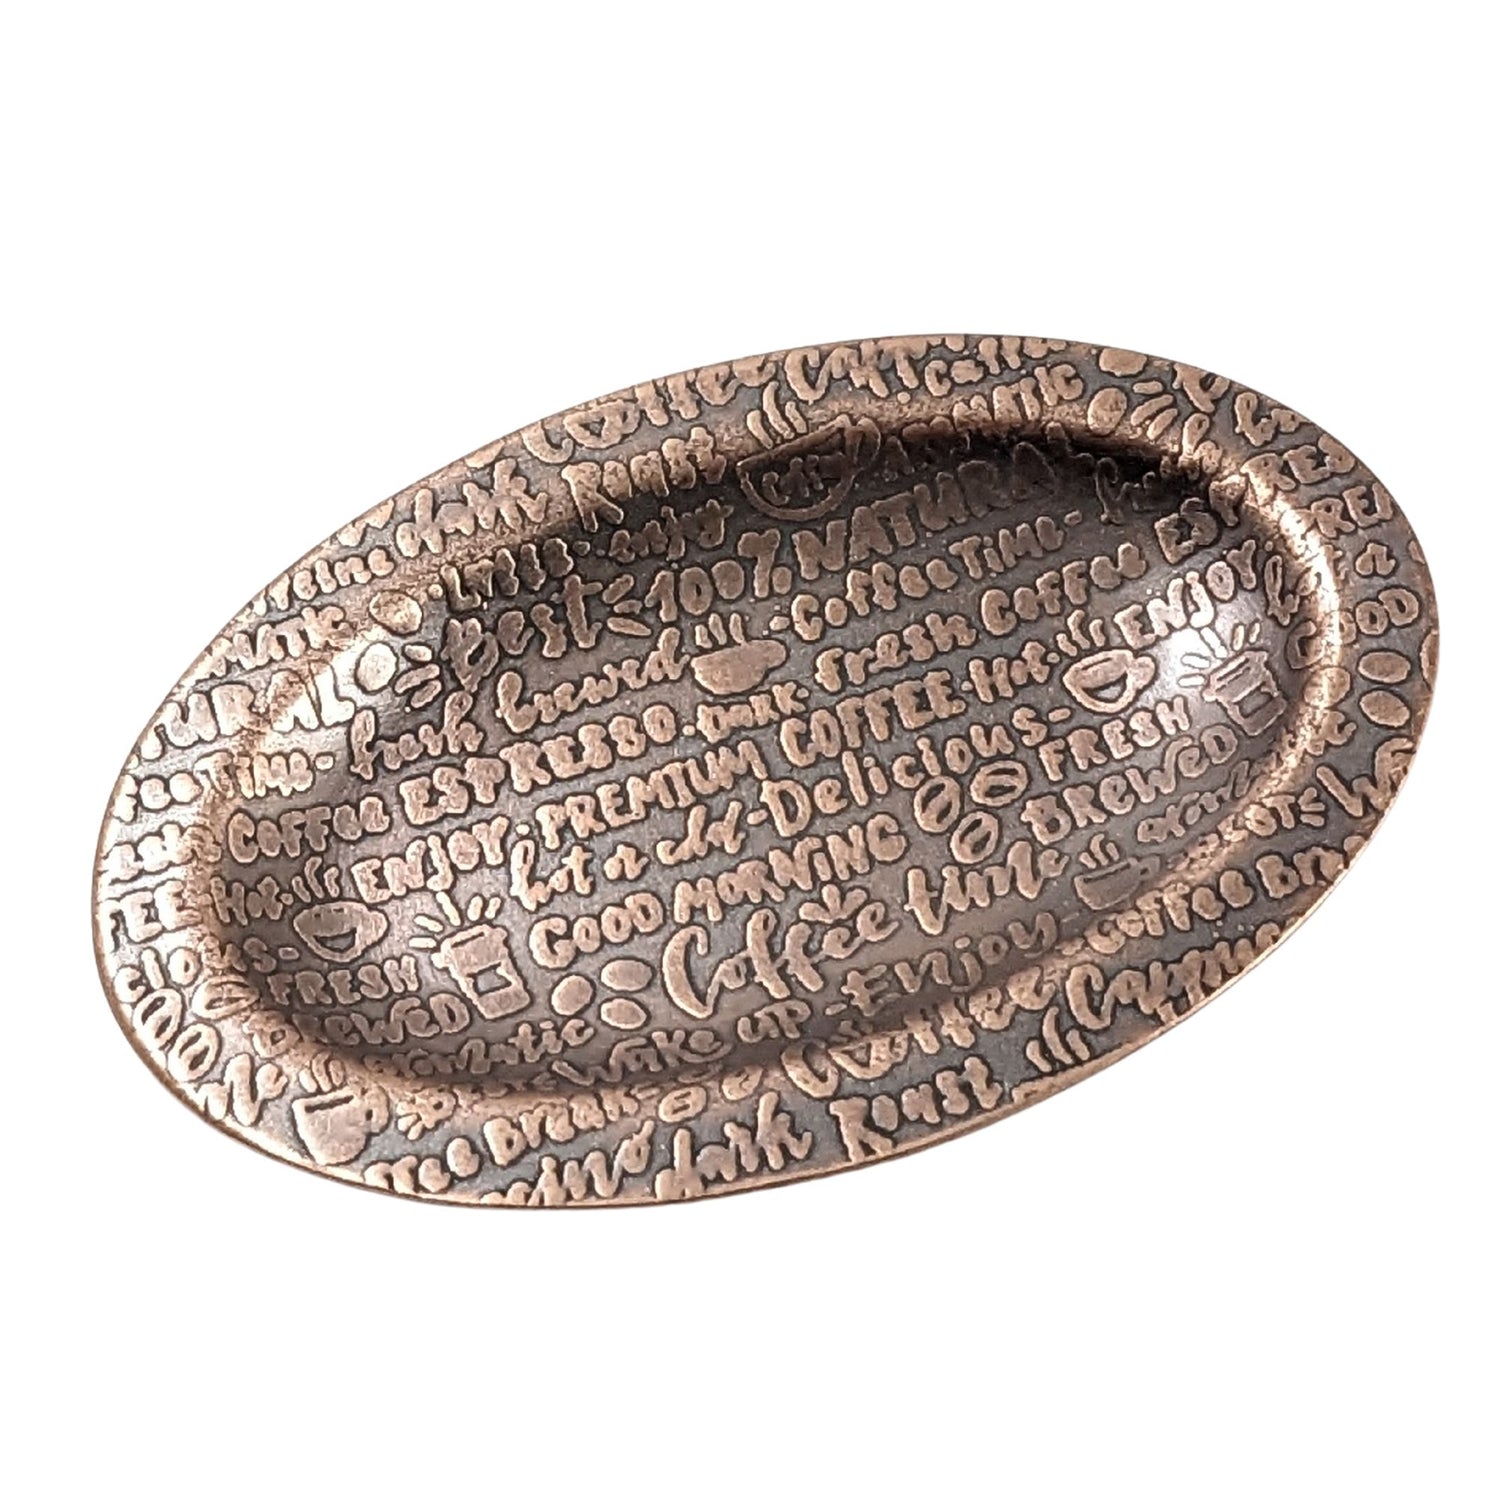 An oval copper ring dish with a raised edge. The dish has an impressed words that describe coffee like premium, good morning, wake up, fresh brewed, expresso, and more.